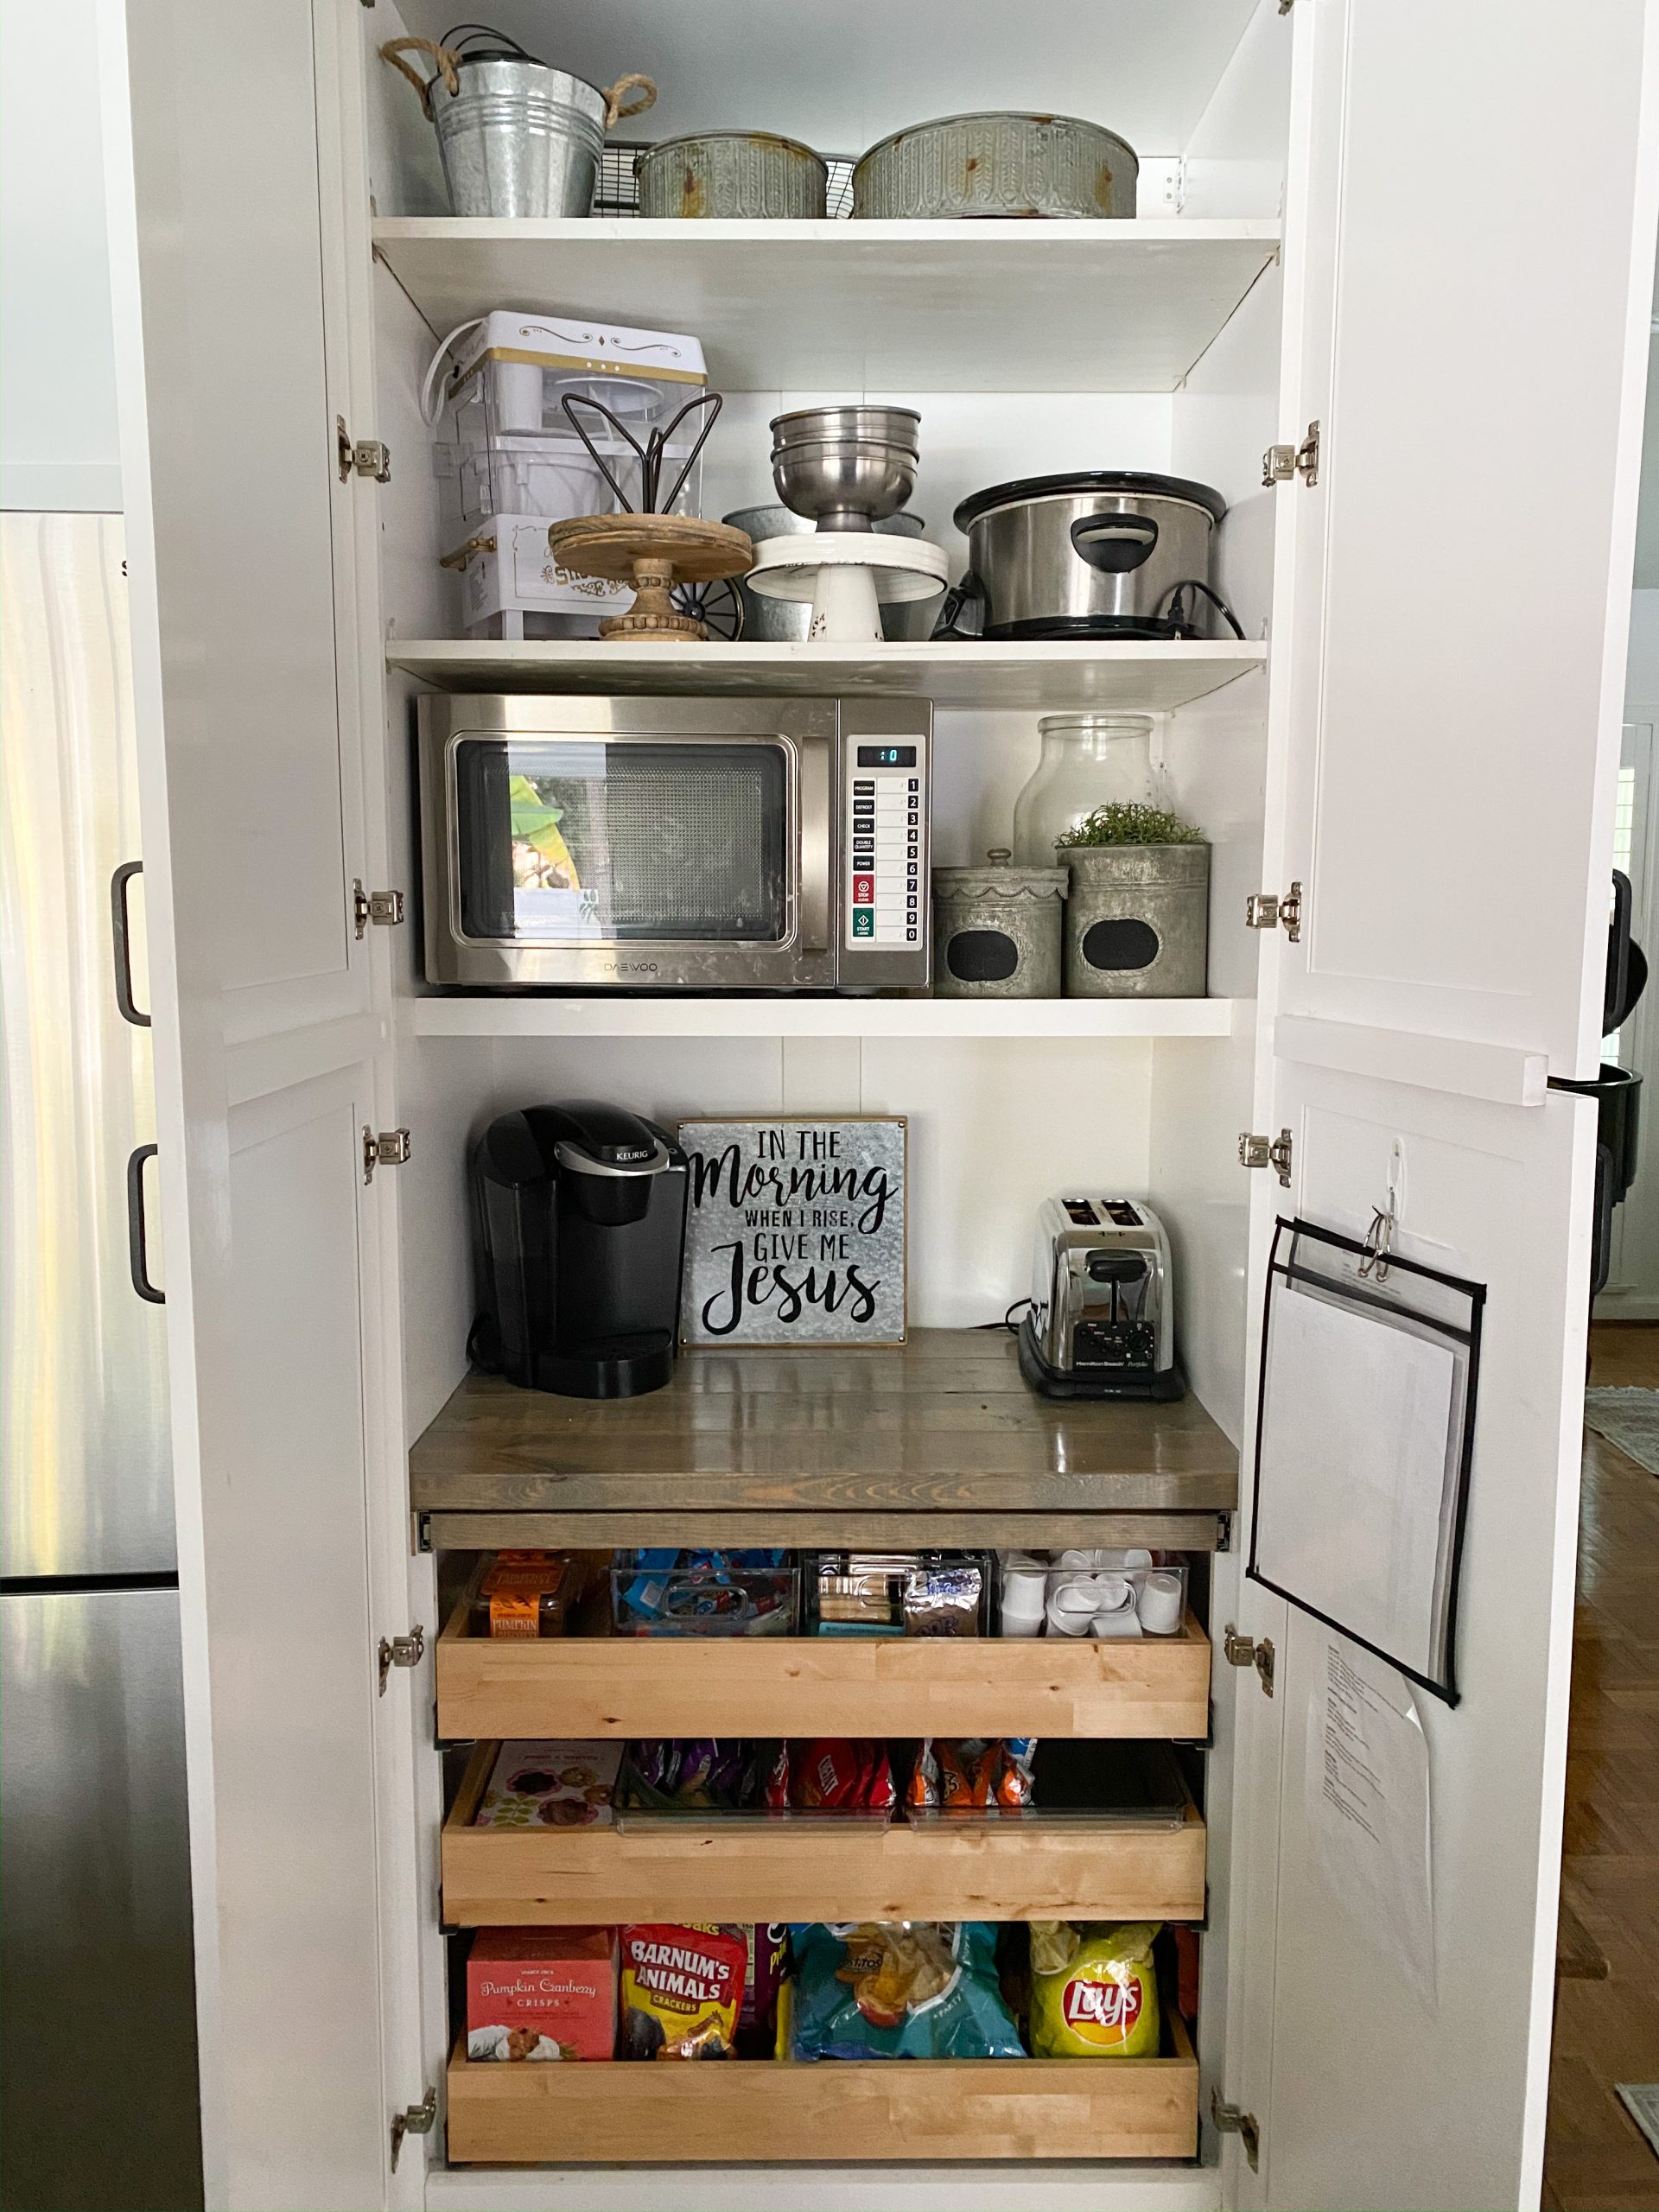 https://robynsfrenchnest.com/wp-content/uploads/2021/10/Pic-of-organized-pantry-scaled.jpg